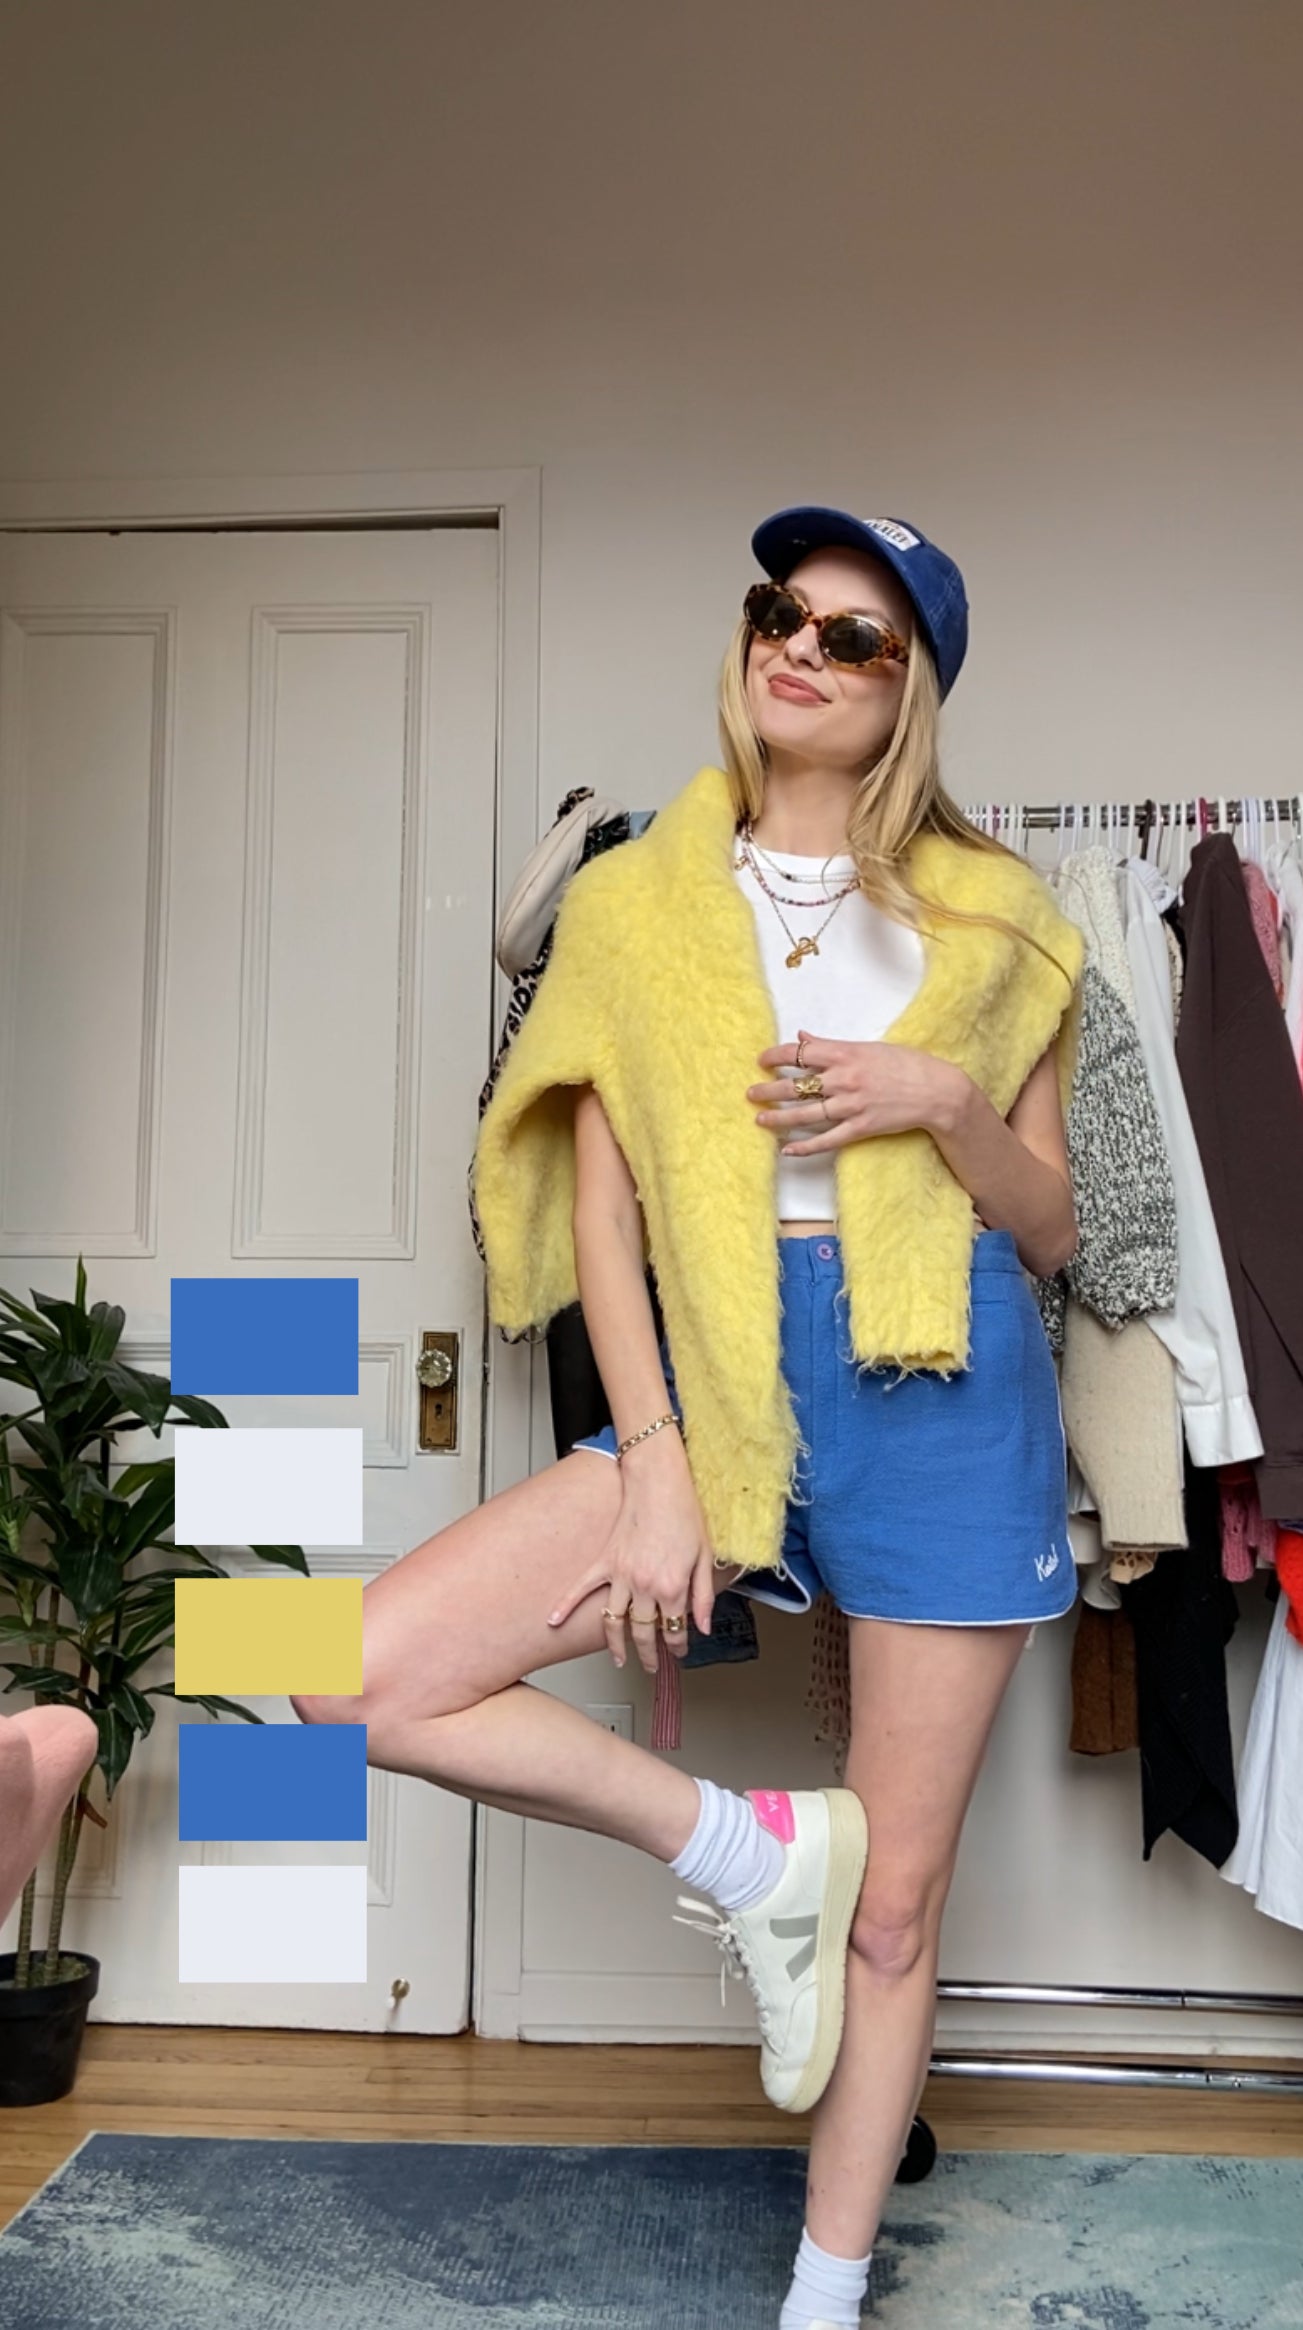 Woman in sunglasses and cap stands posing with one leg raised, wearing a yellow furry jacket and denim shorts